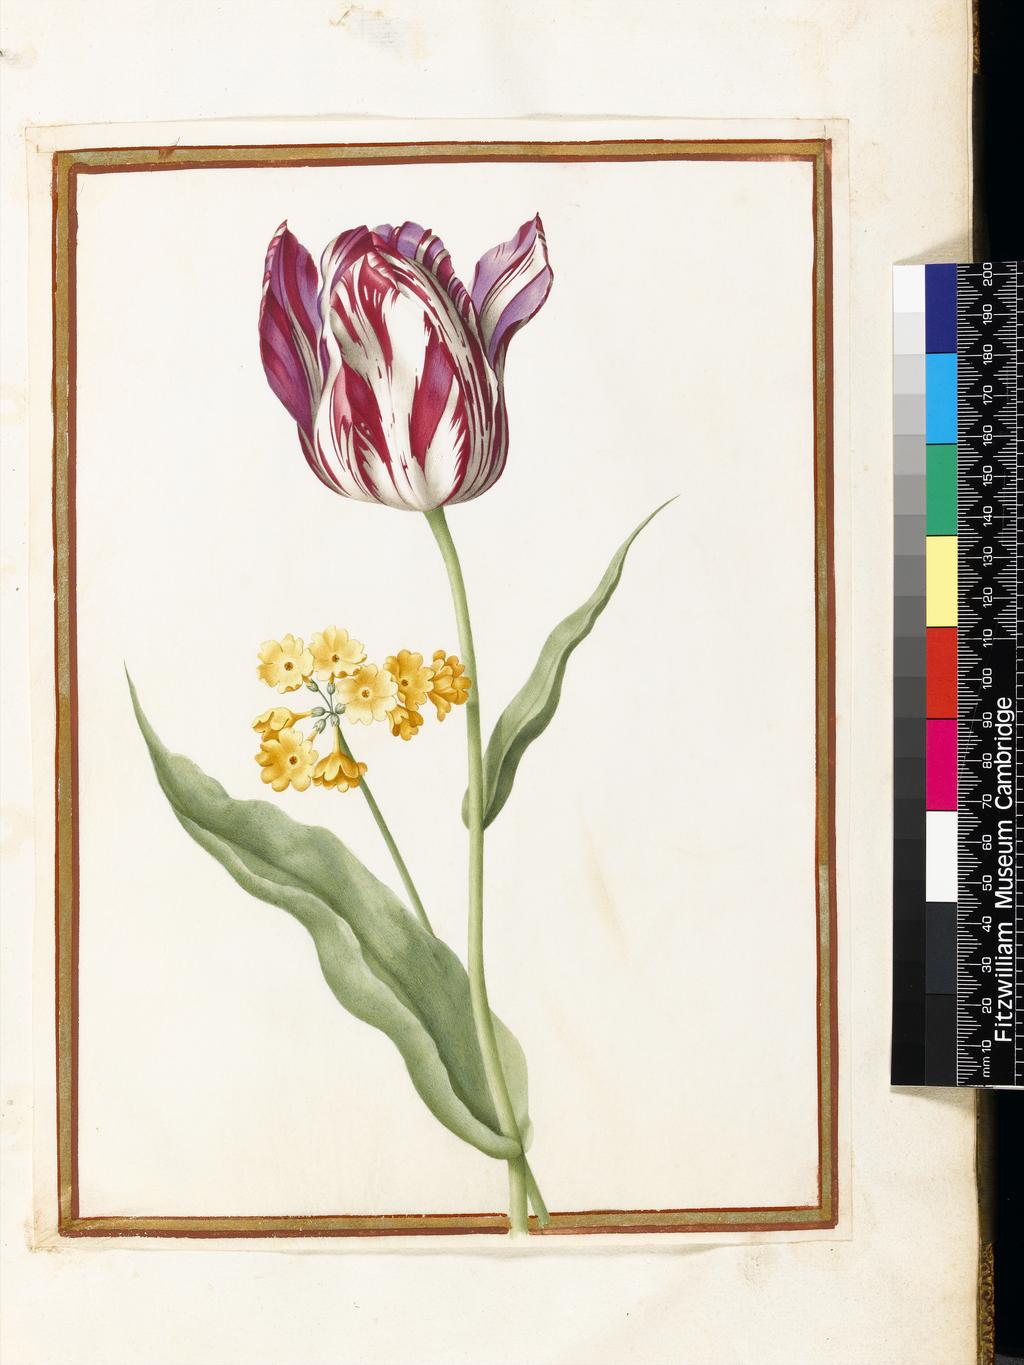 An image of A 'broken' tulip and Primula auricula. Robert, Nicolas attributed to (French, 1614-1685). Graphite, watercolour and bodycolour on vellum, height 278 mm, width 202 mm. Album containing 62 botanical drawings on vellum tipped in on the gilt-edged pages of the album which bear the watermark of an 18th century French paper-maker, Malmenayde of Thiers (active from 1731). Bound in red morocco with clasps, the spine tooled in gilt. The Pages are interleaved with thin protective paper. Ruled lines of red and gold border the drawings on all sides. 17th Century. French.